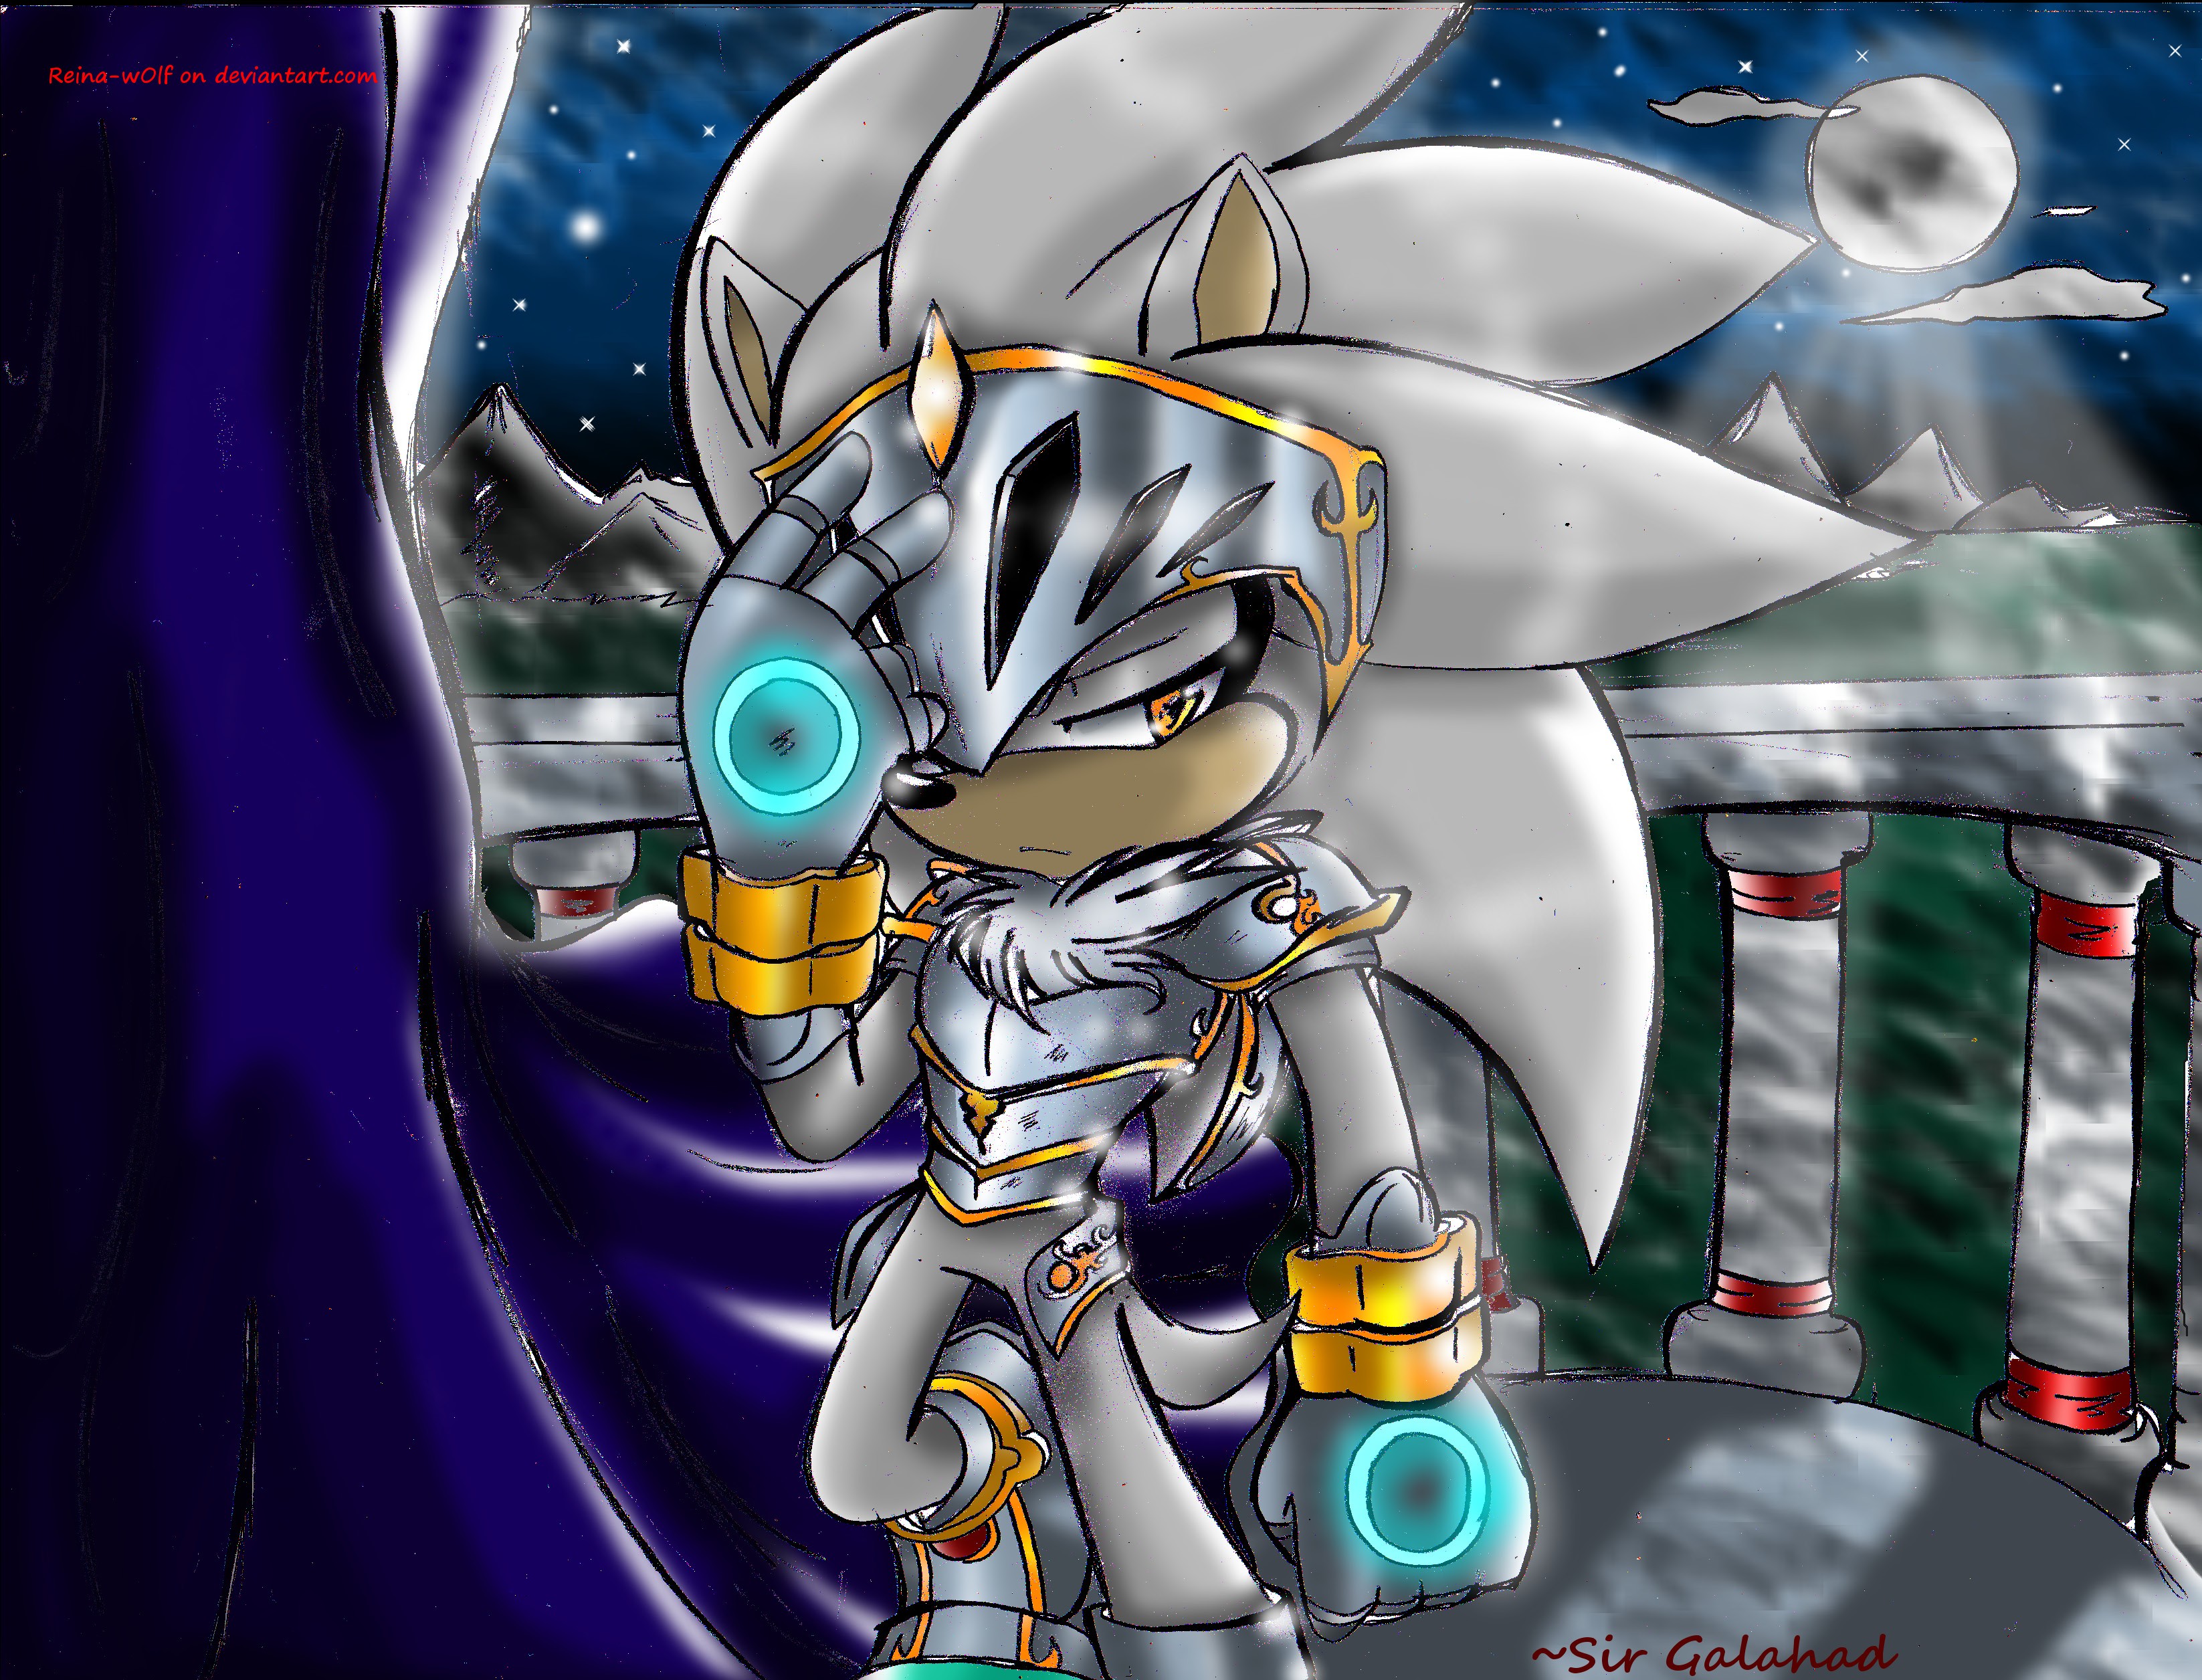 General 3292x2512 video games Sega Sonic the Hedgehog knight video game characters Silver the Hedgehog Moon moonlight watermarked one eye obstructed frown closed mouth mountains sky clouds night Reina-wOlf